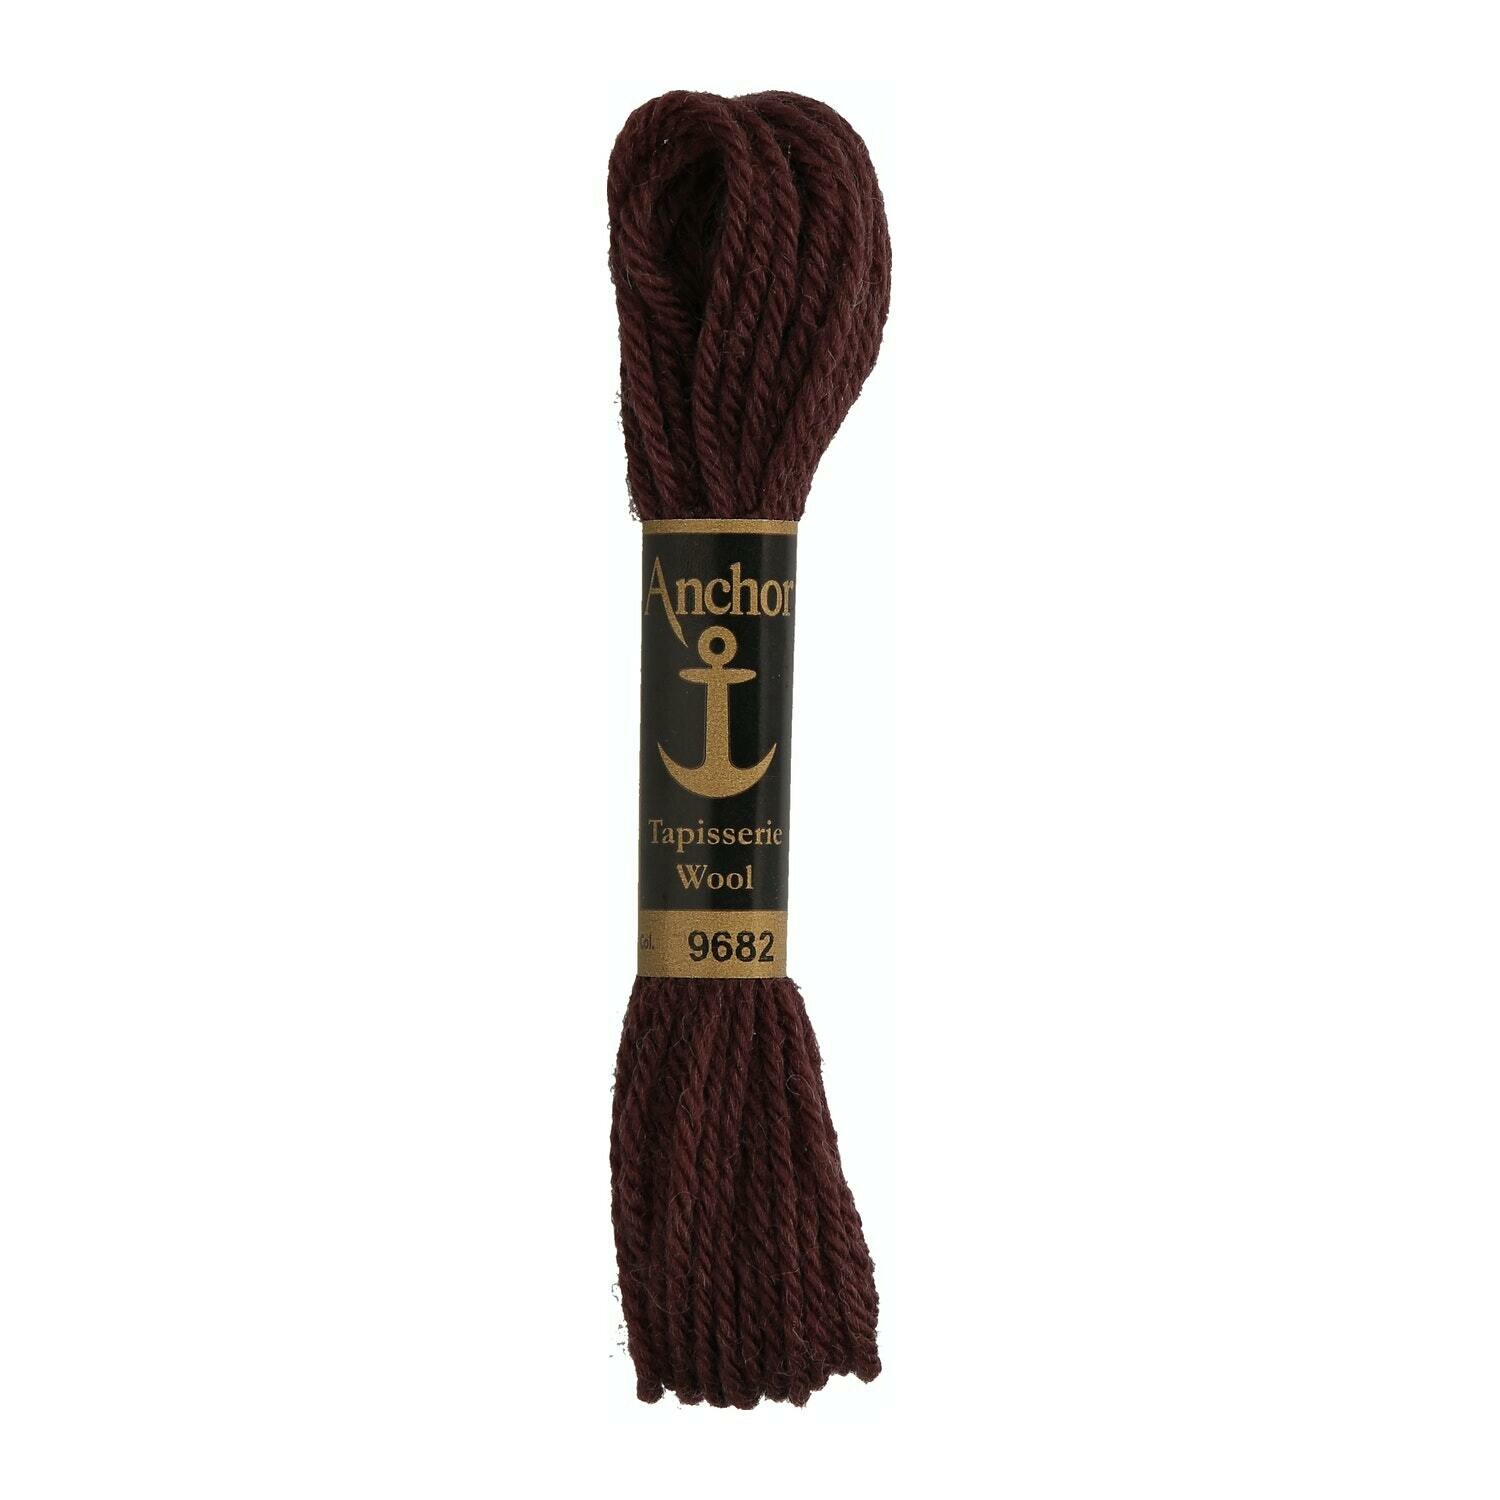 Anchor Tapisserie Wool # 09682